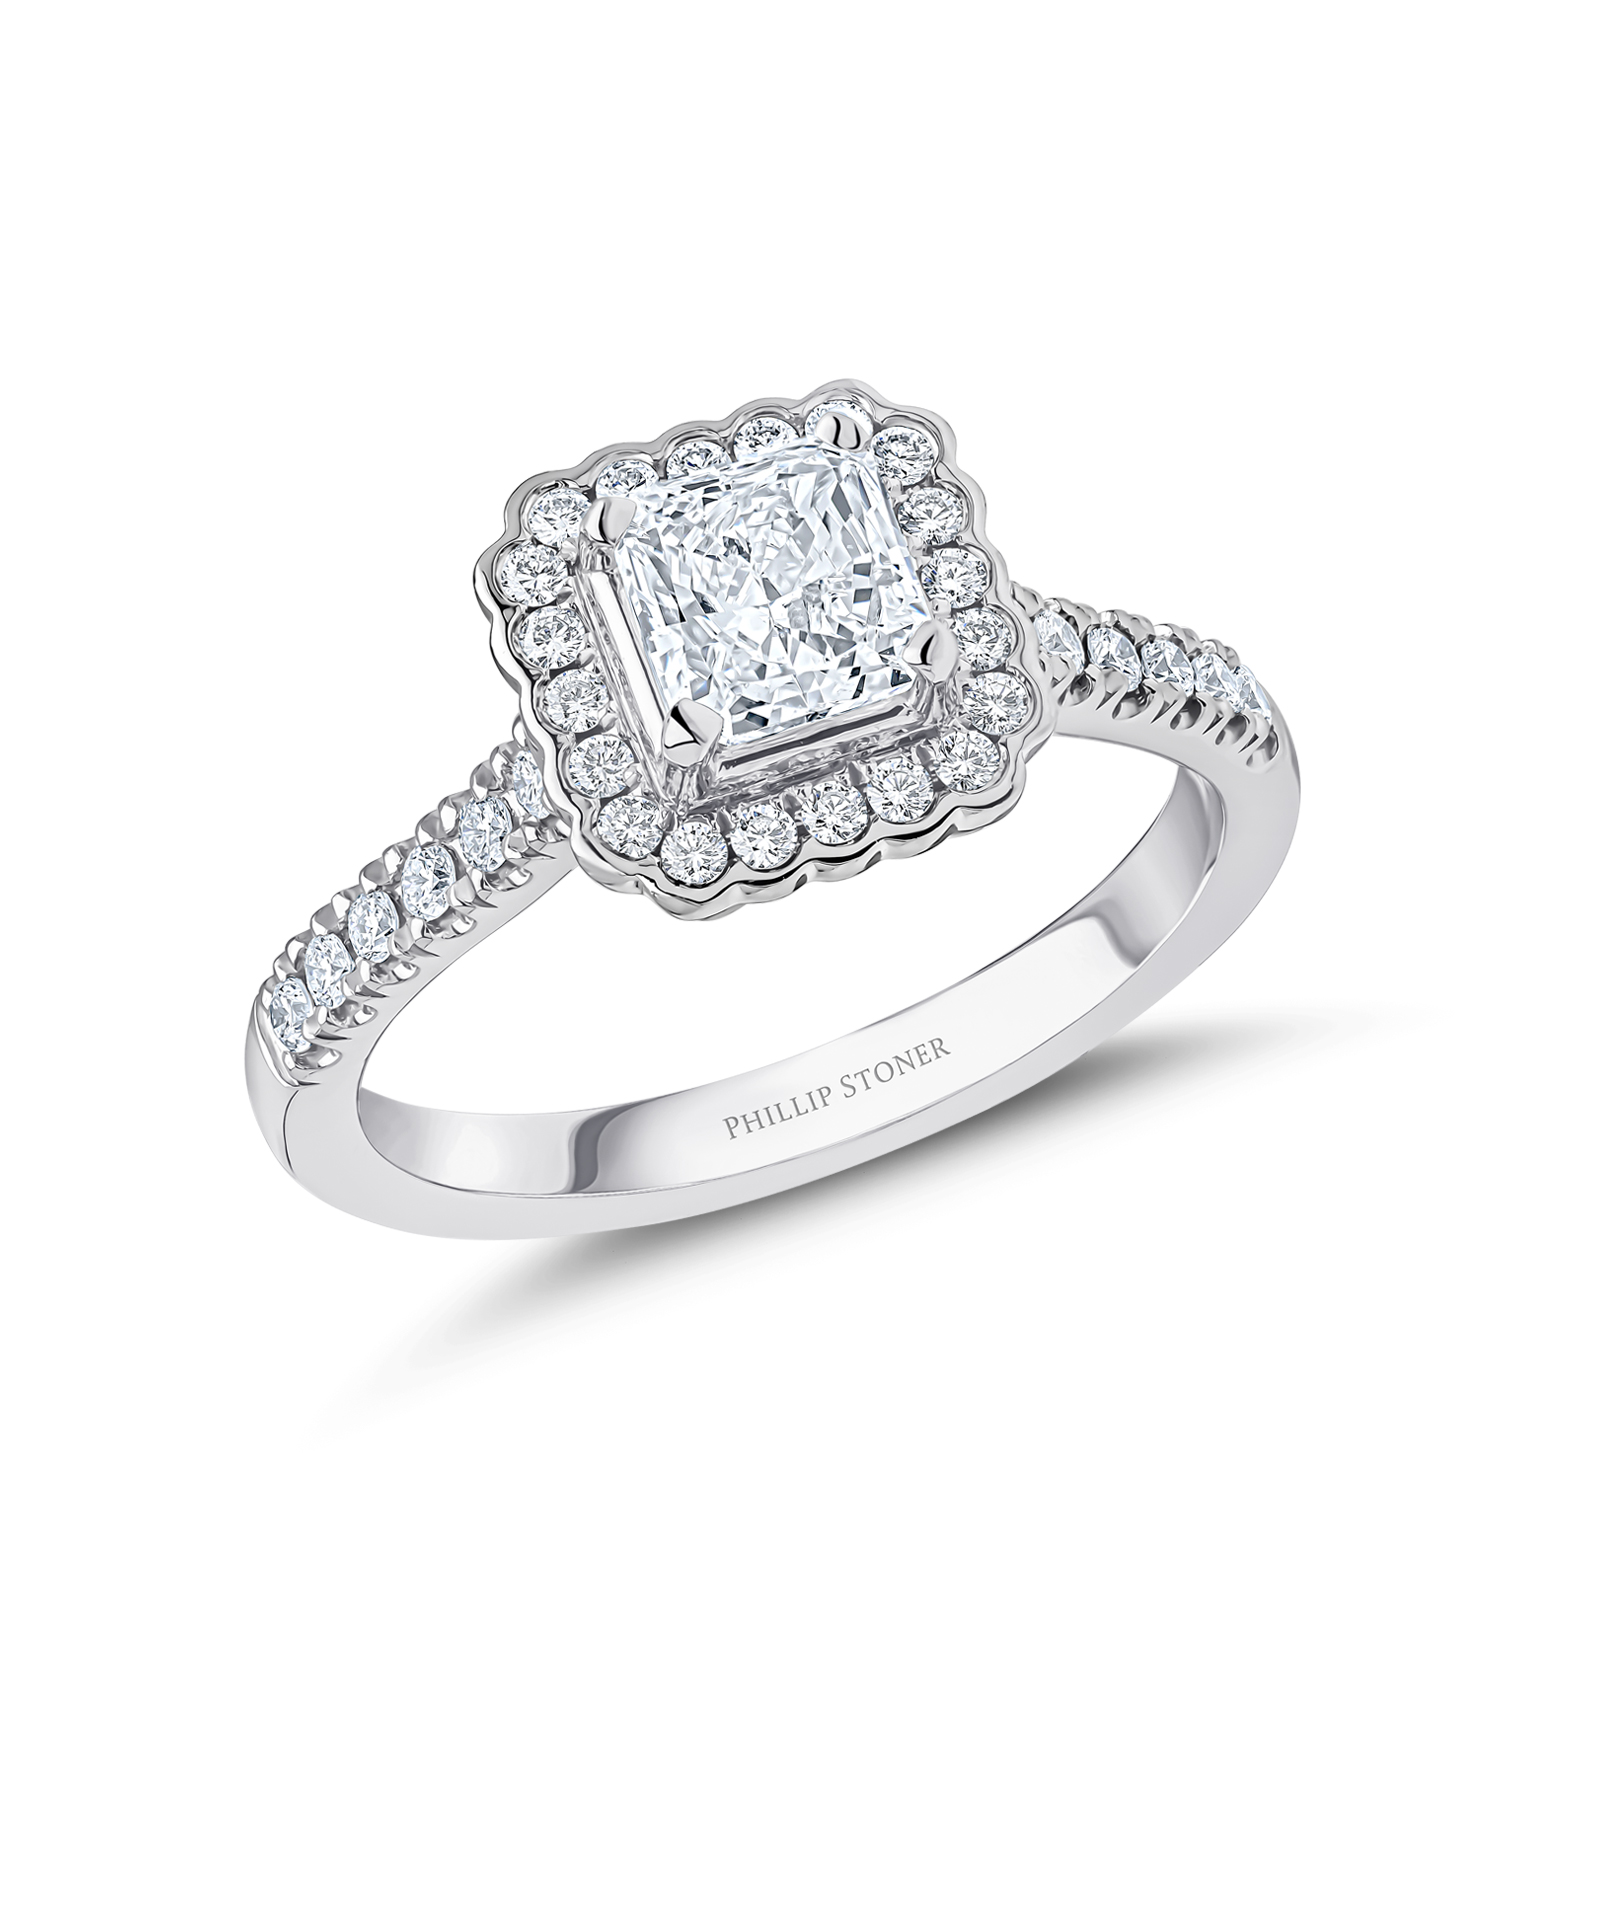 0.70ct Radiant Cut Scalloped Halo Engagement Ring - Phillip Stoner The Jeweller